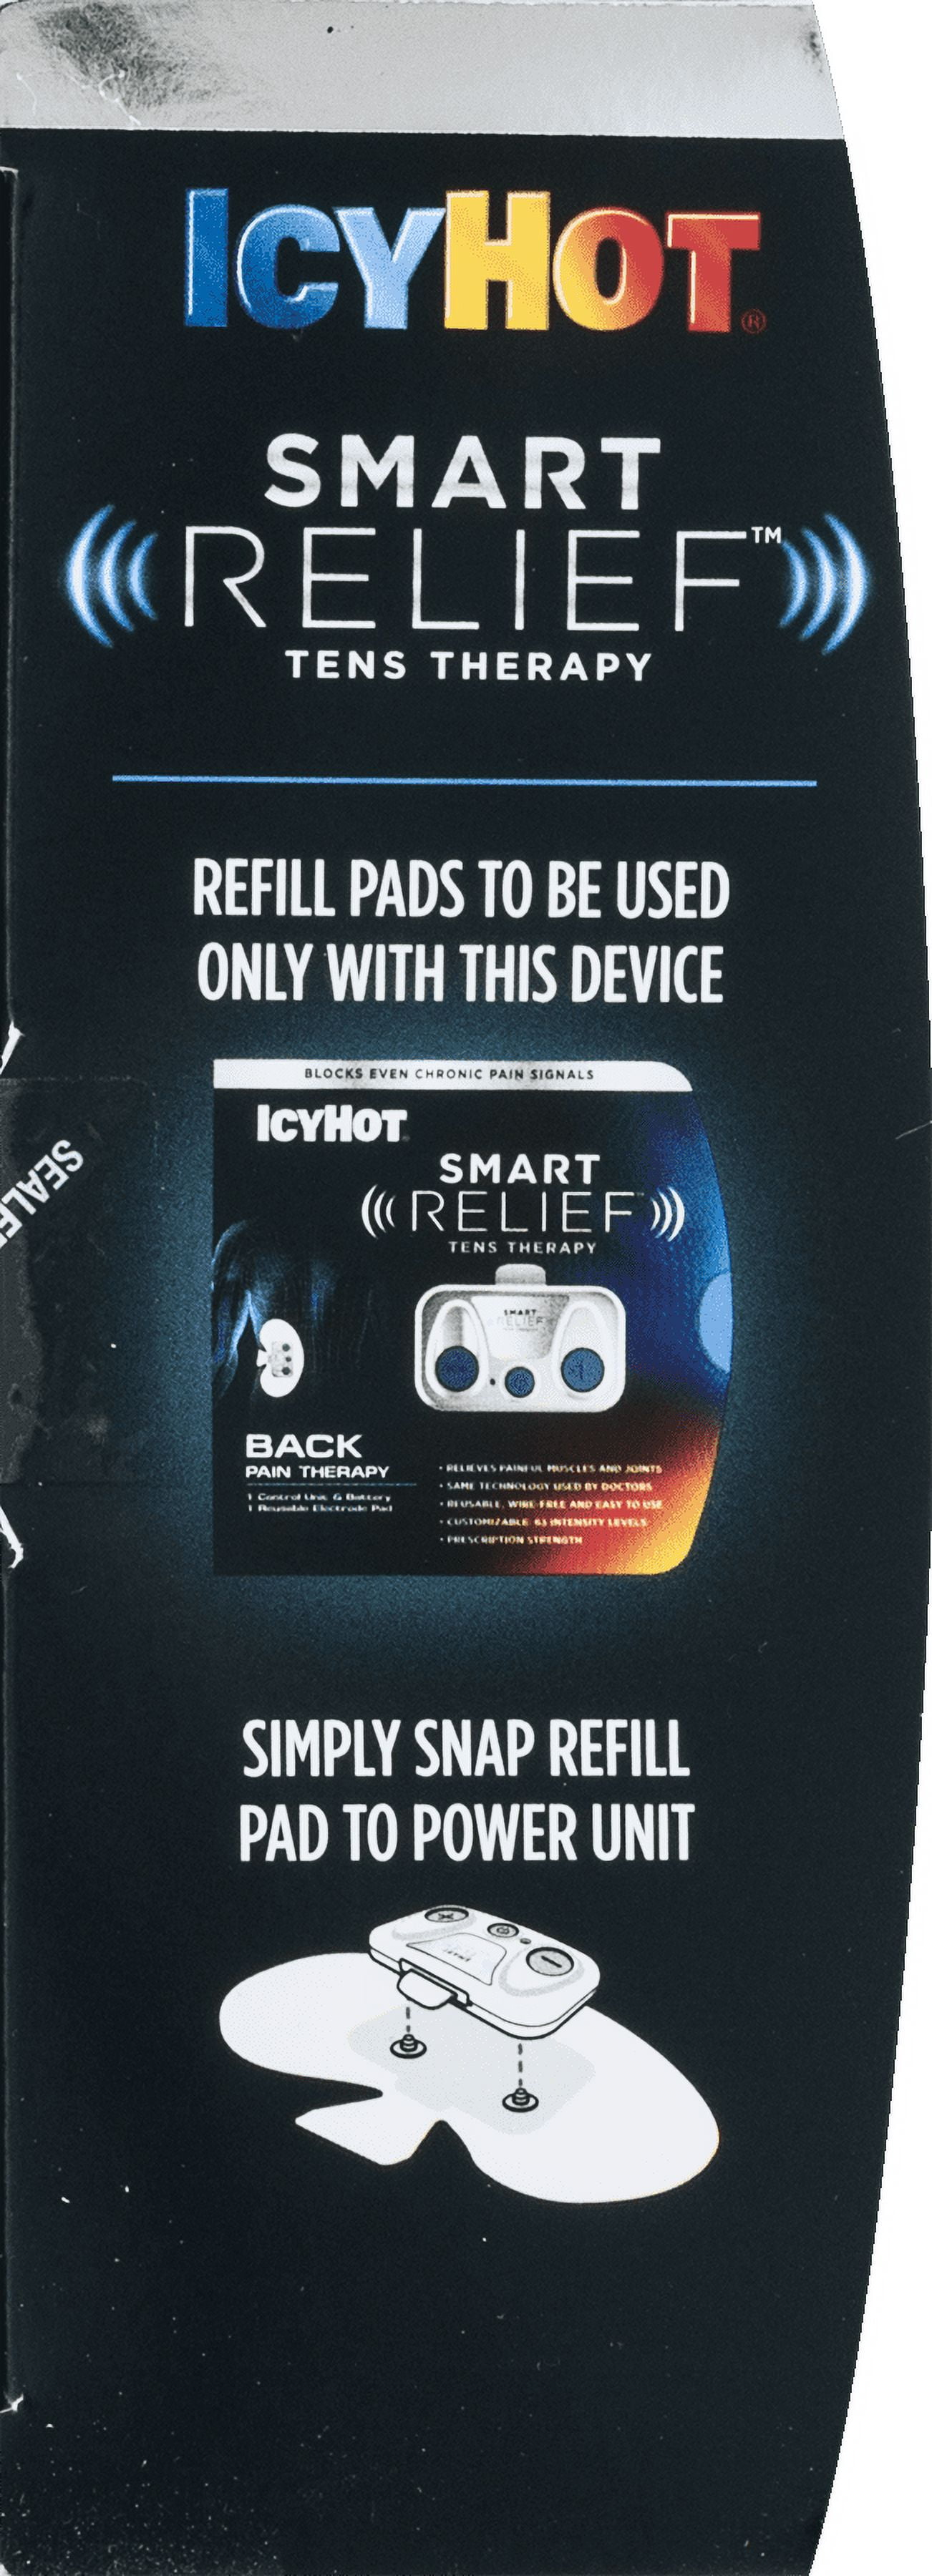 Icy Hot Smart Relief Reusable Refill Pads - 2 Carton for sale